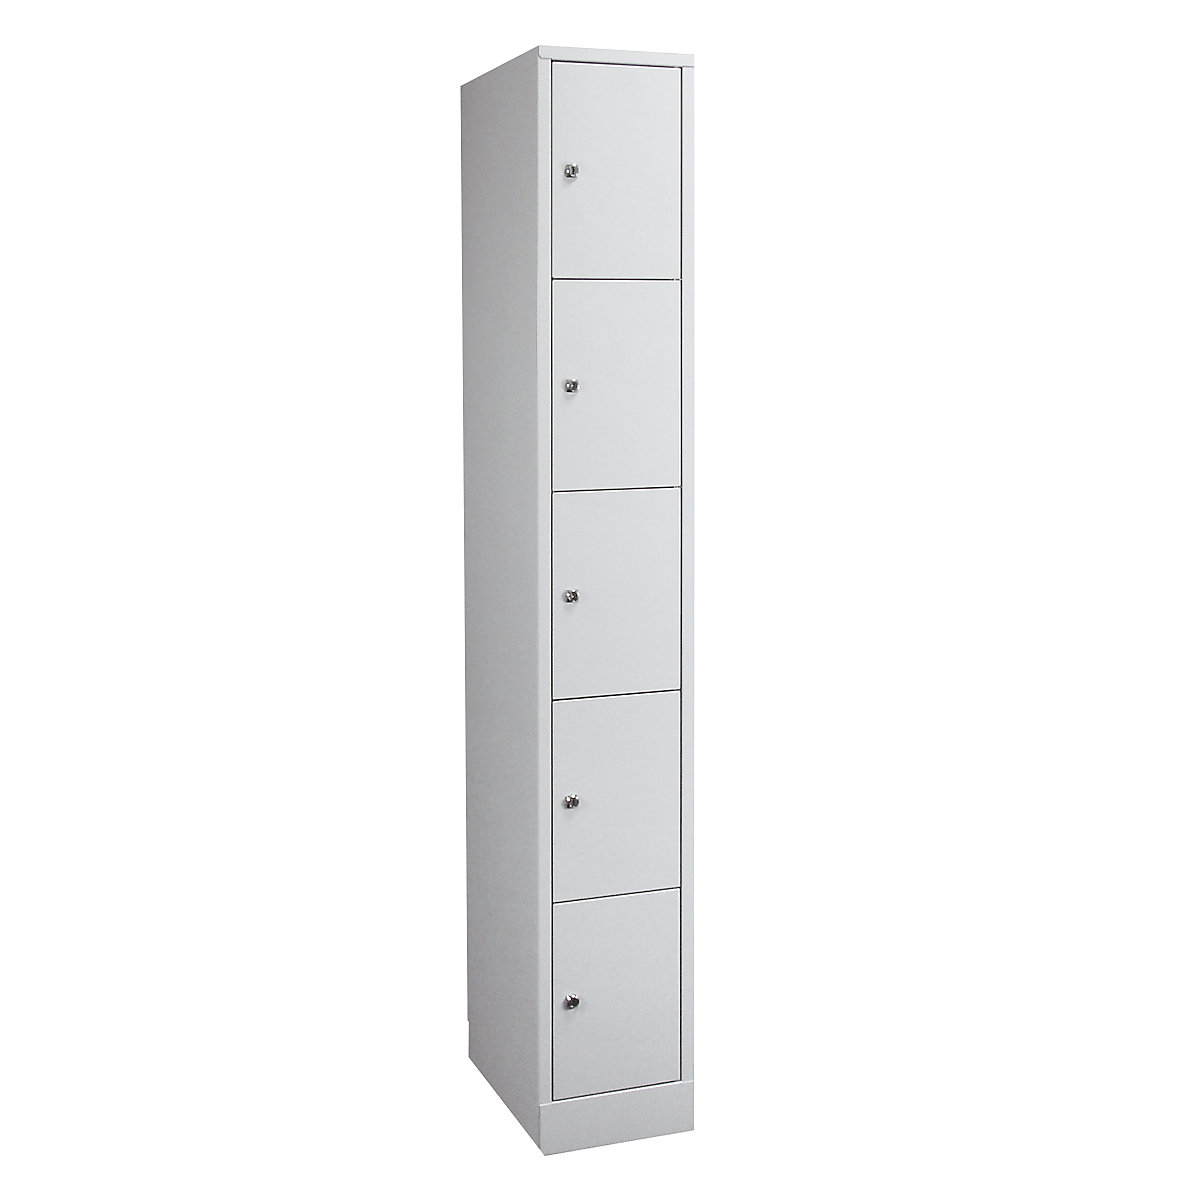 Clothes lockers in practical sizes – Wolf, 5 compartments, width 400 mm, light grey / light grey-5